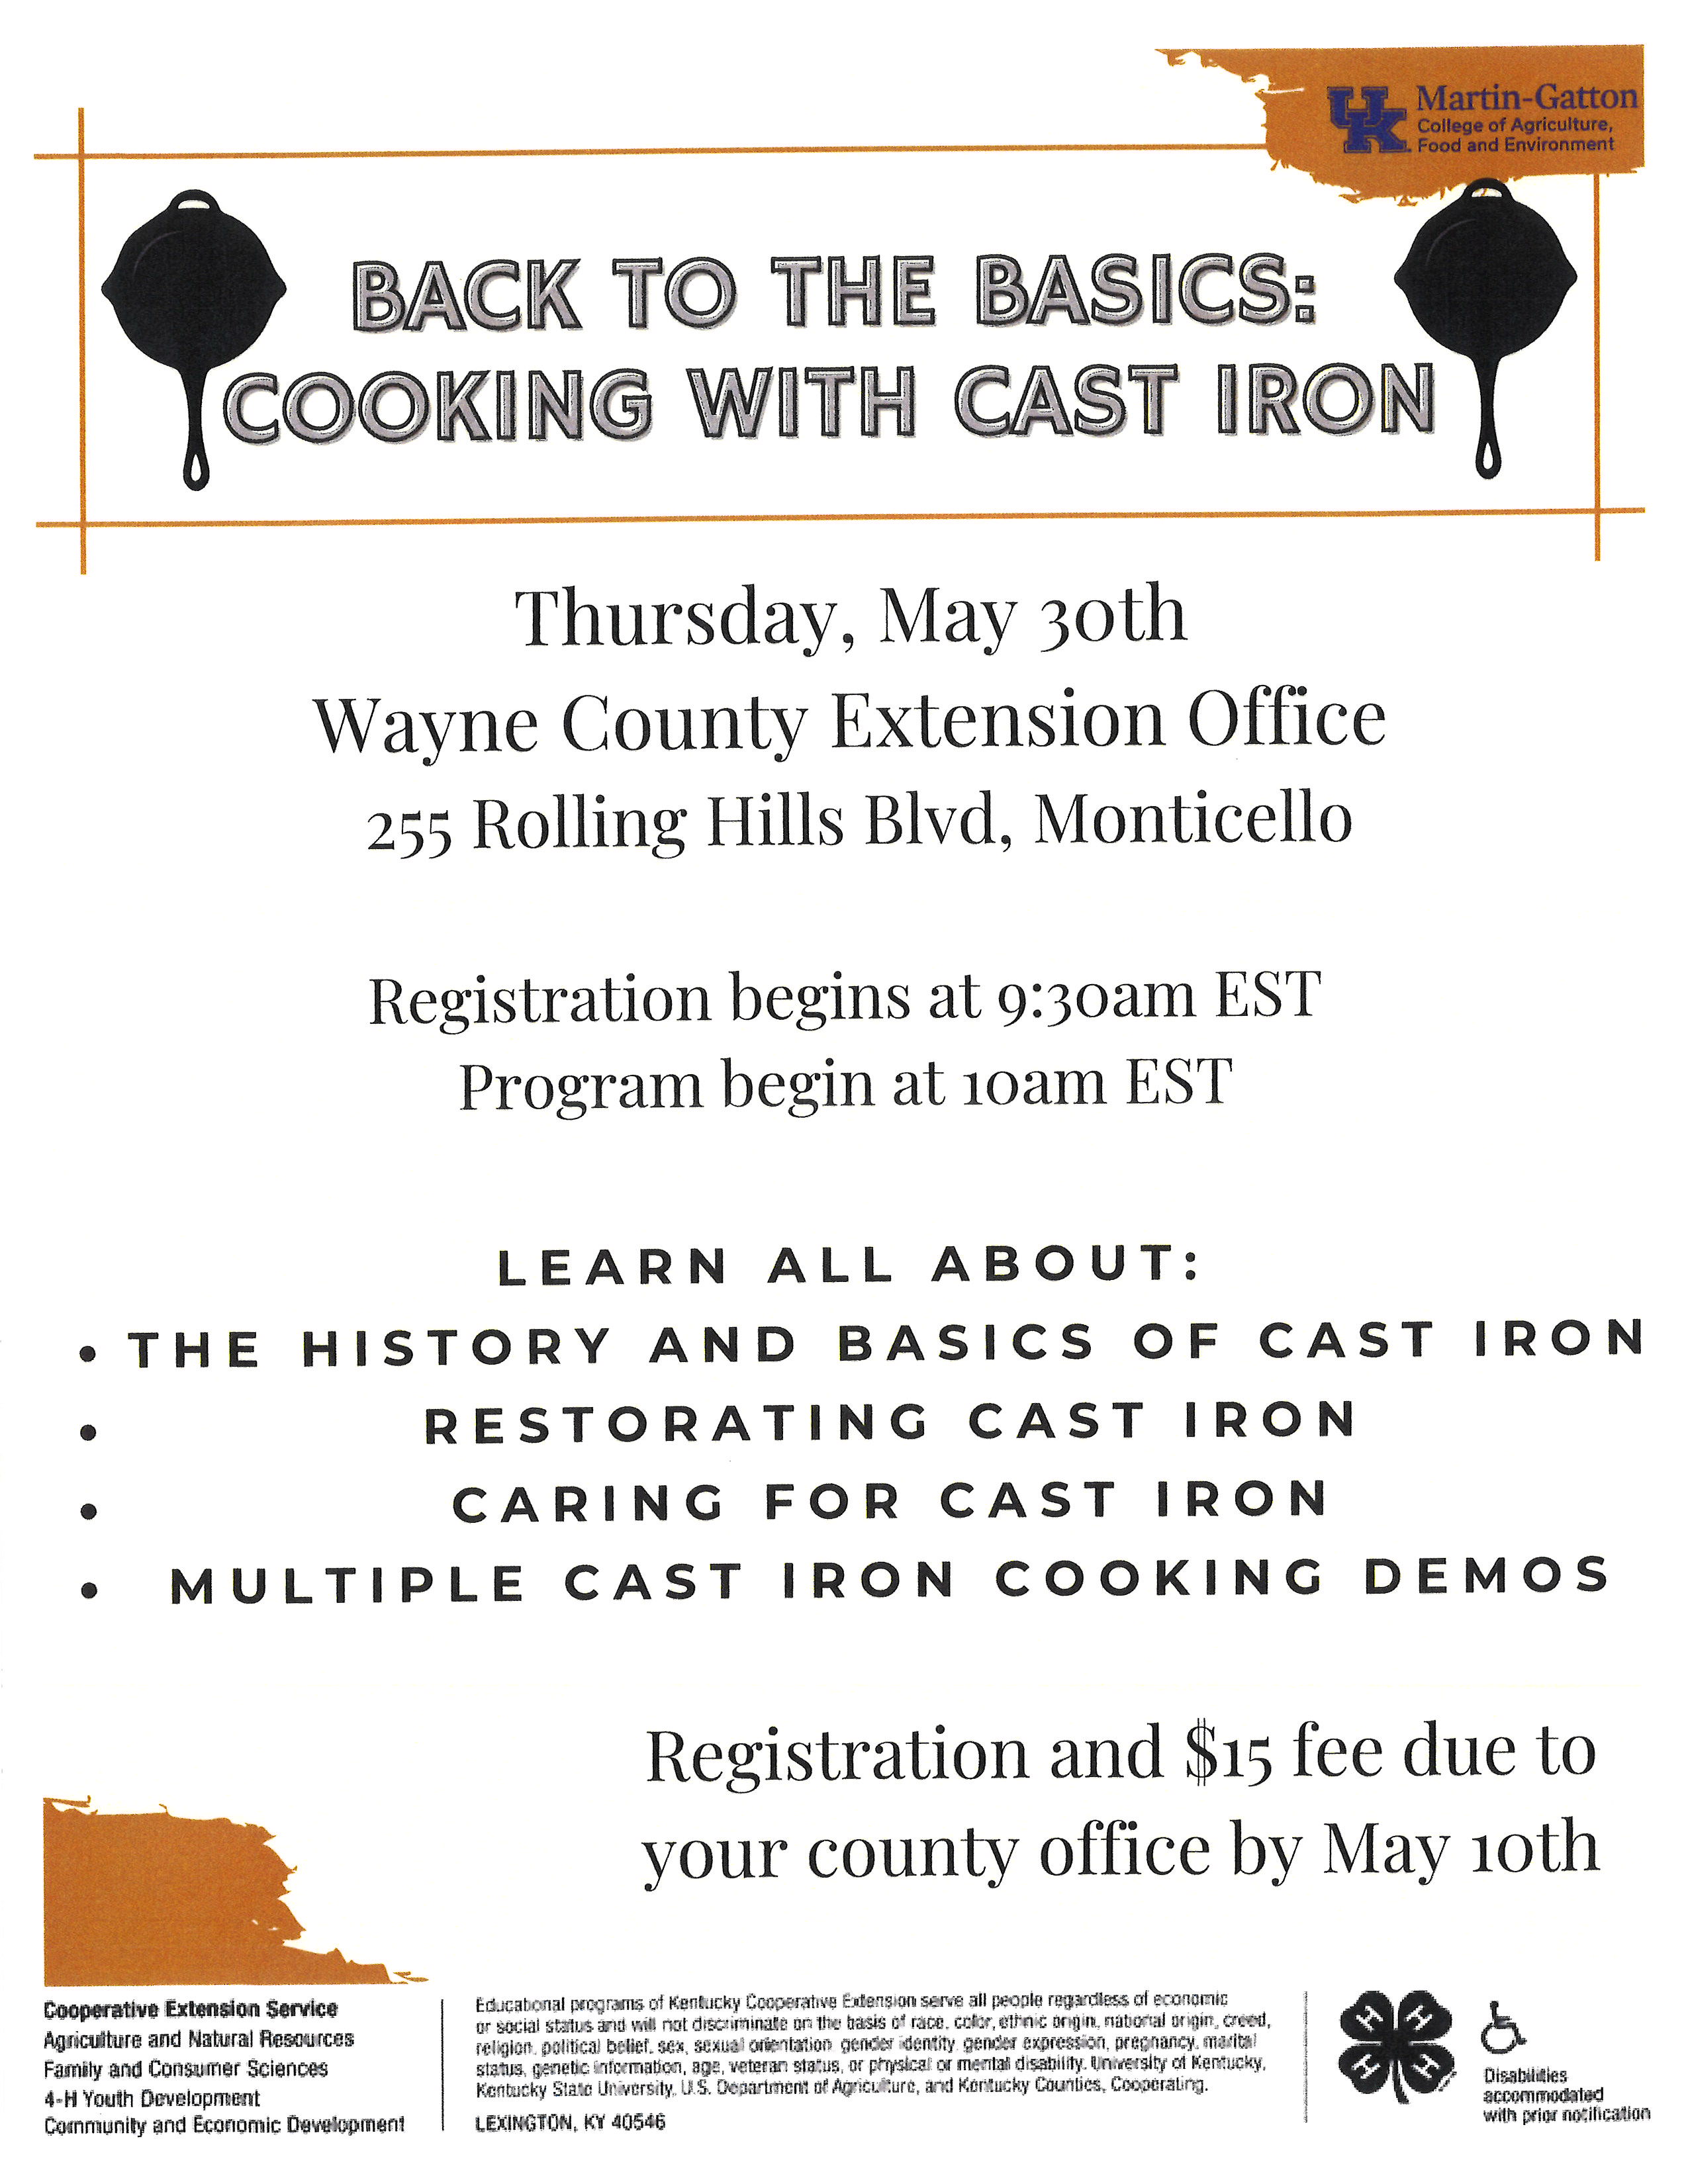 flyer for cooking with cast iron on may 30th call 606-679-6361 for more information